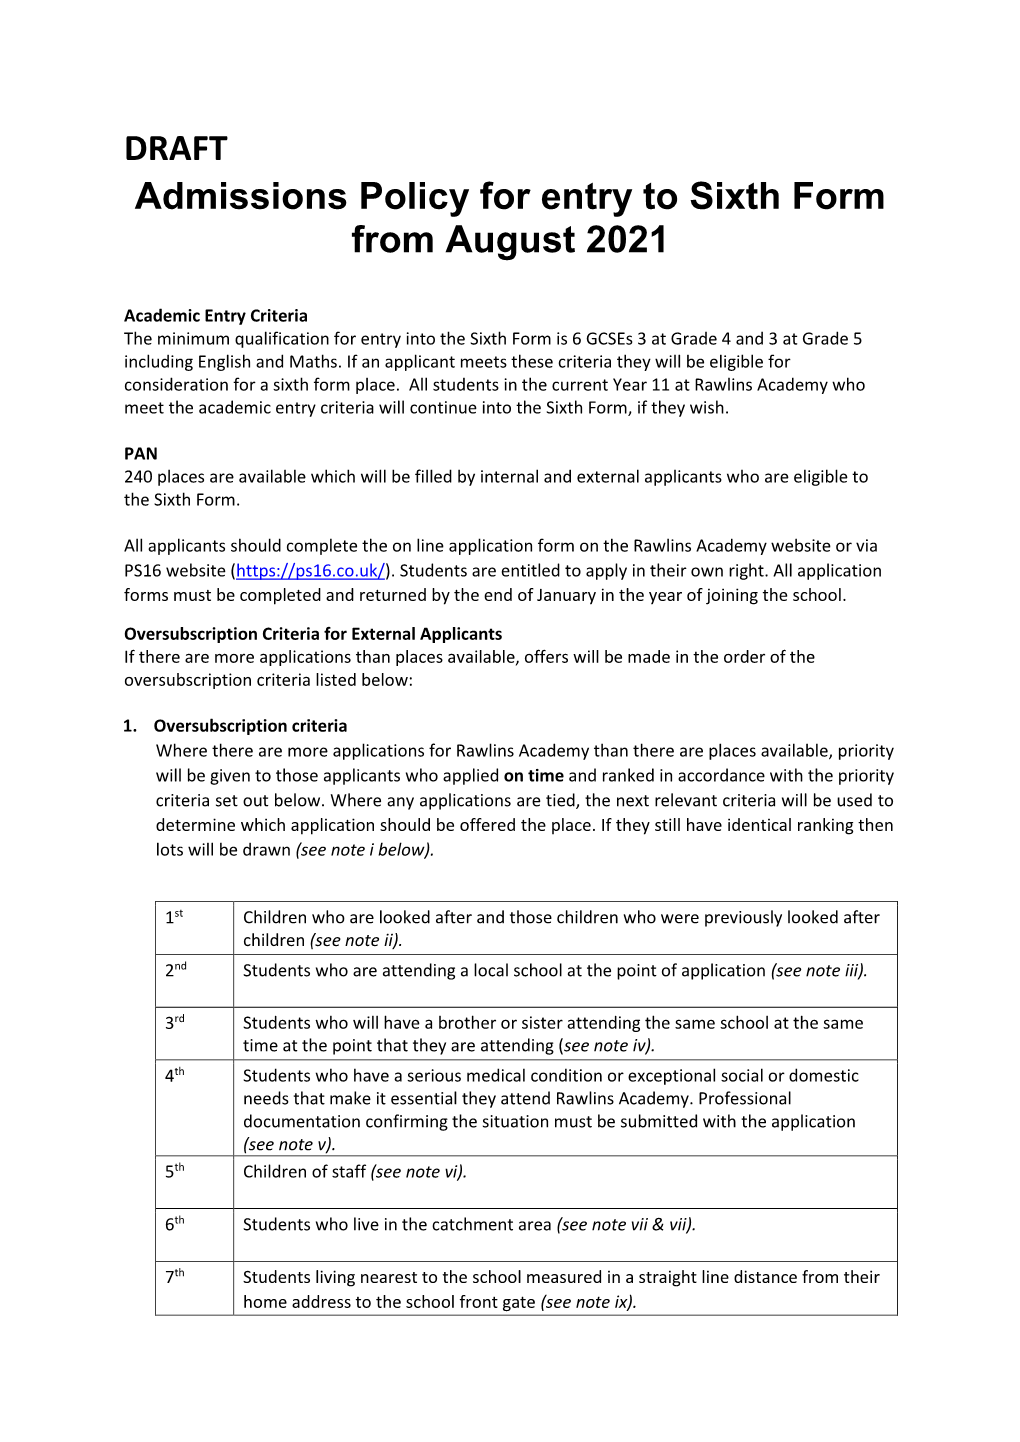 DRAFT Admissions Policy for Entry to Sixth Form from August 2021